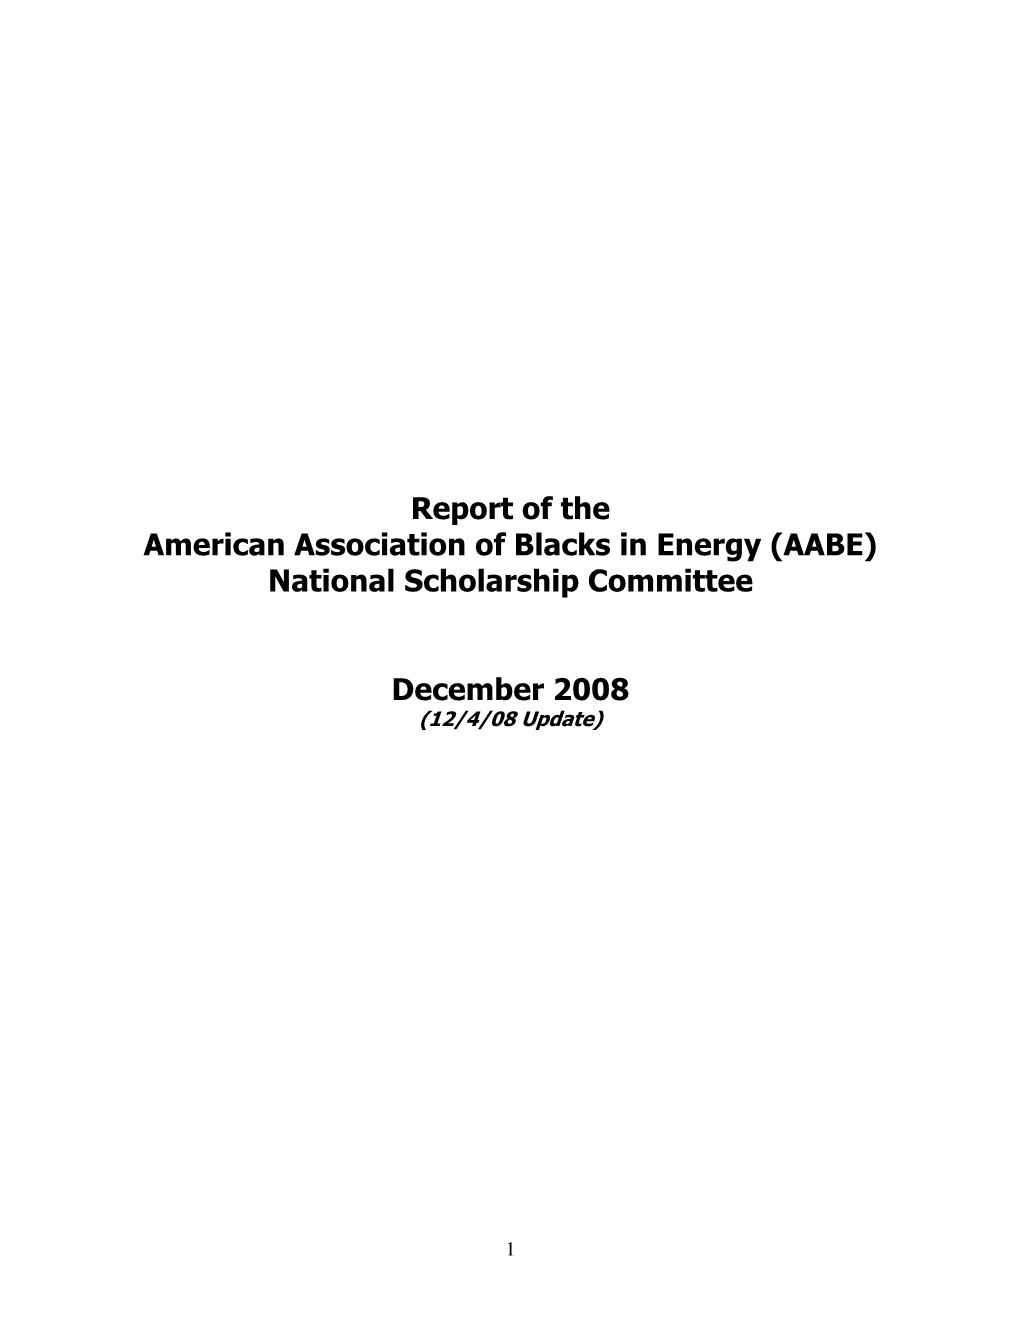 Report of the American Association of Blacks in Energy (AABE) National Scholarship Committee